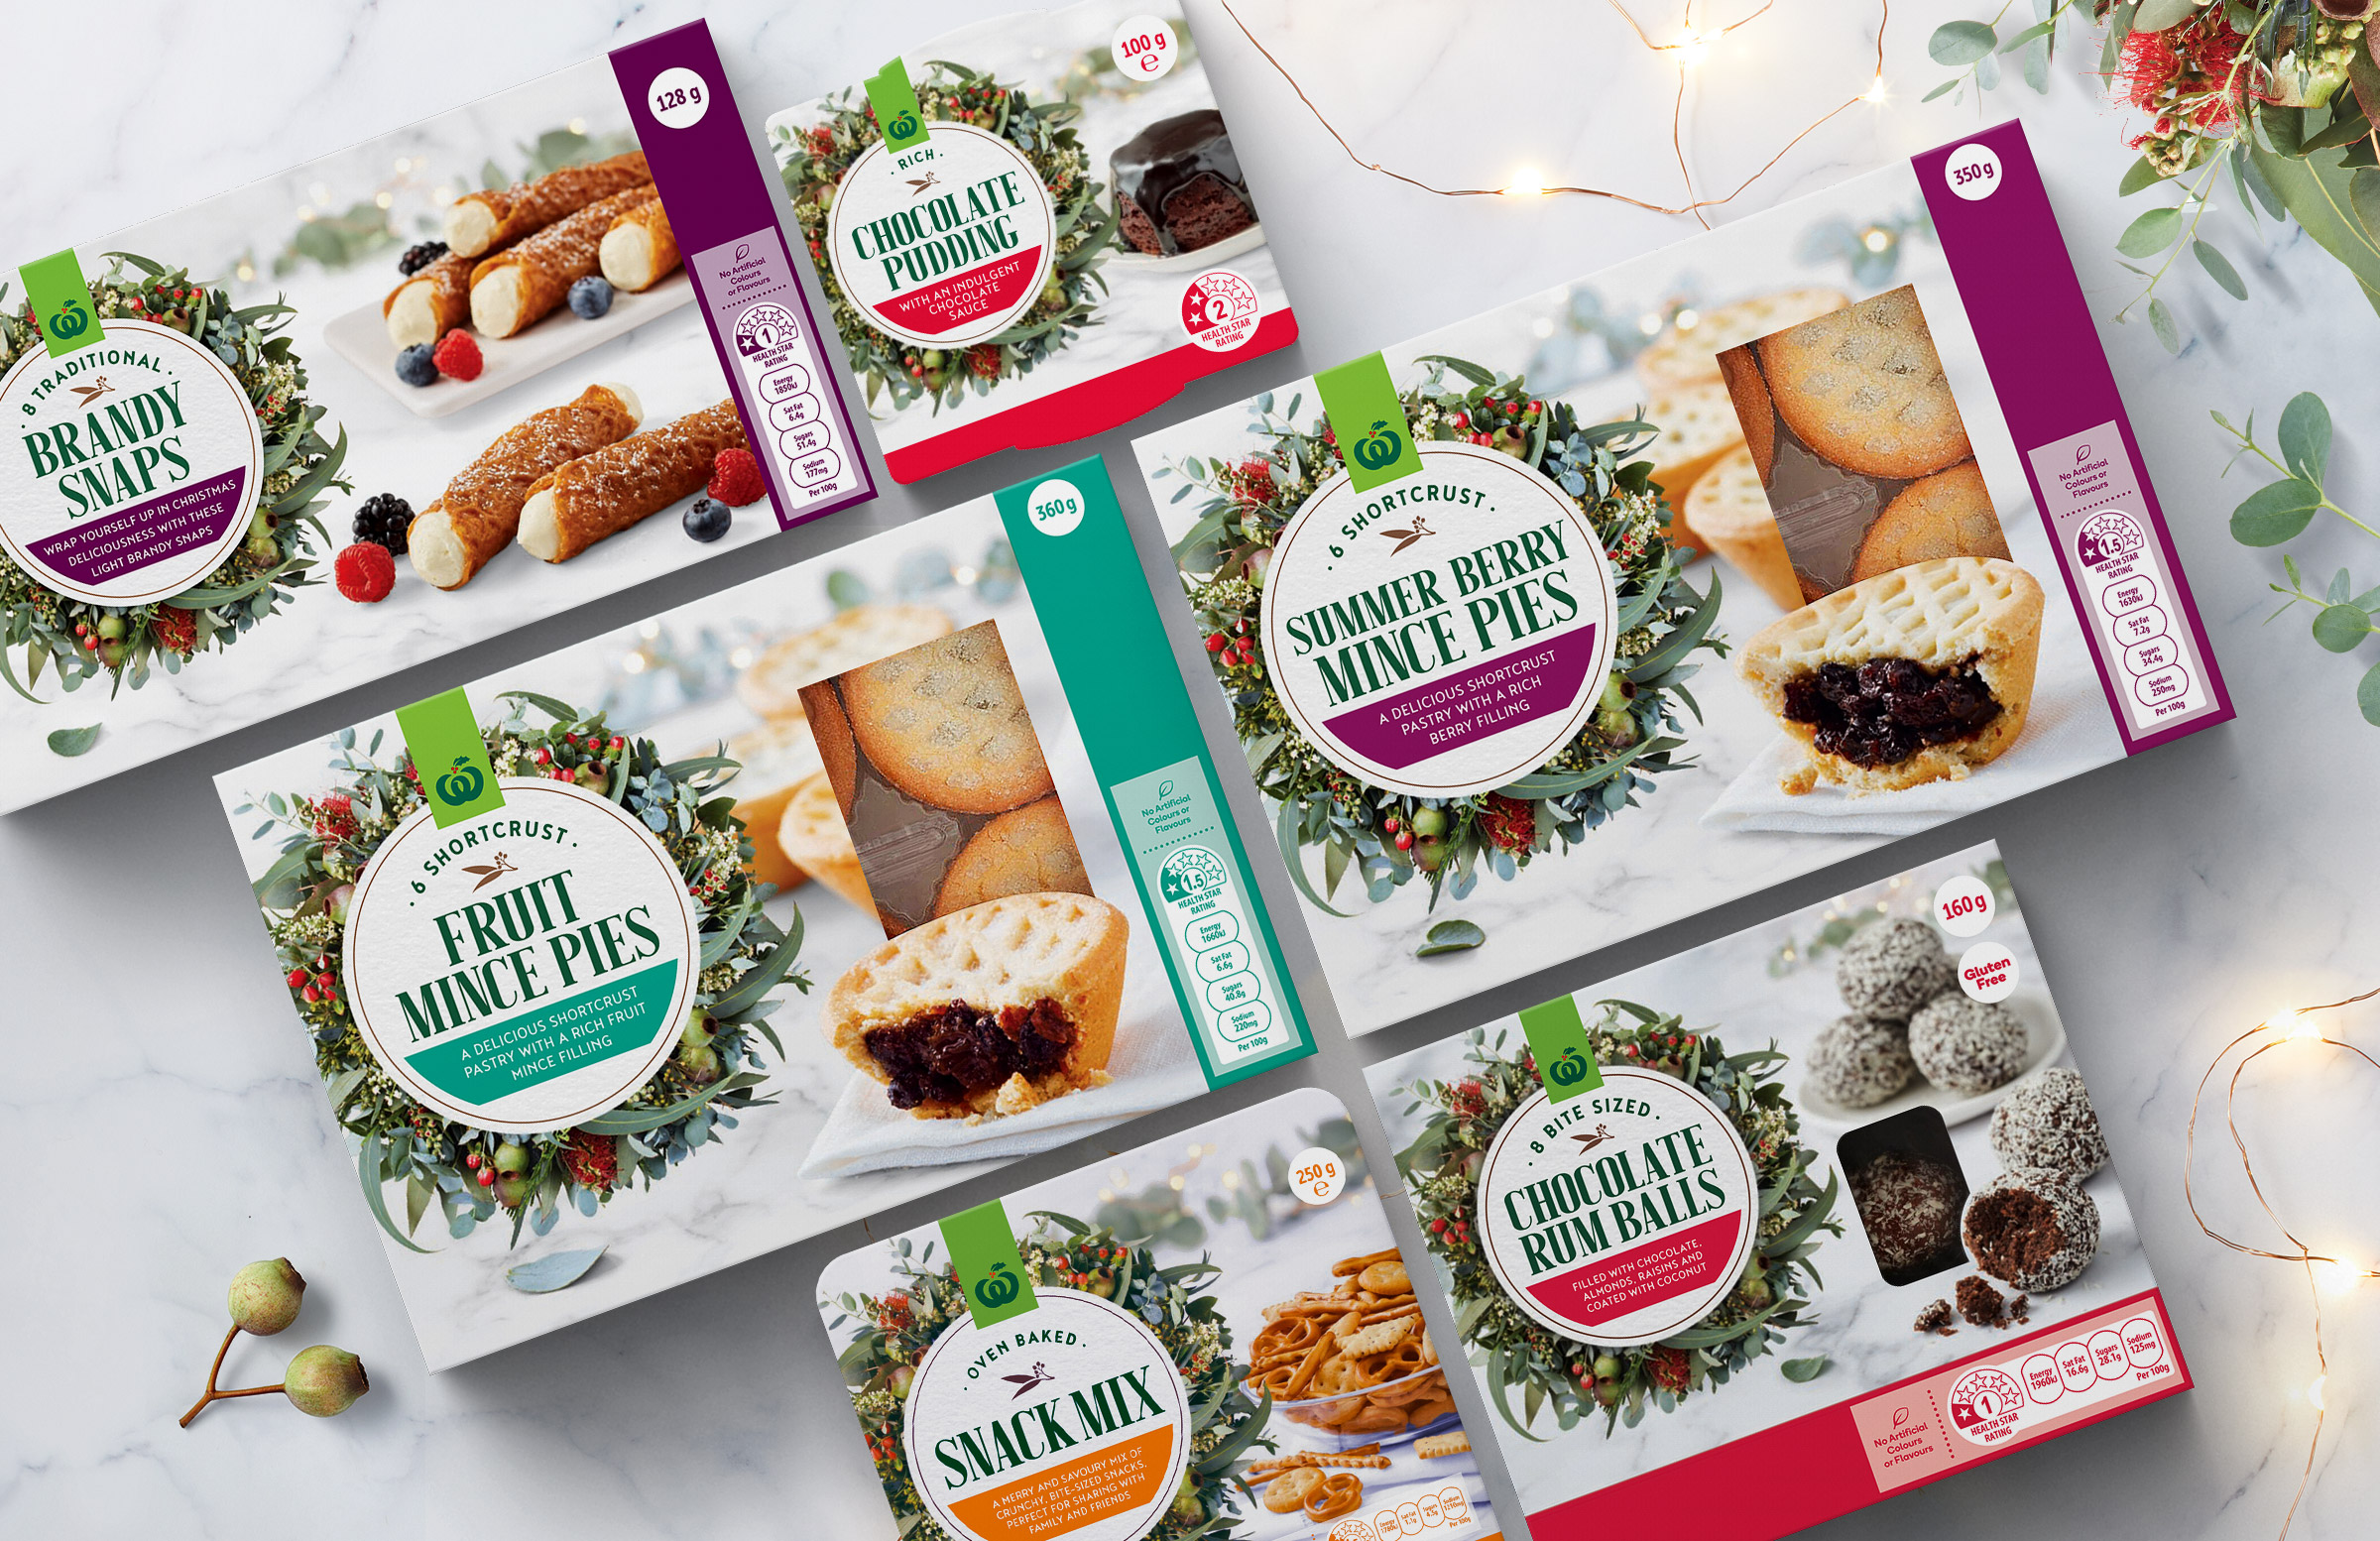 Woolworths-boxer-and-co-packaging-agency-mince-pies-christmas-pies